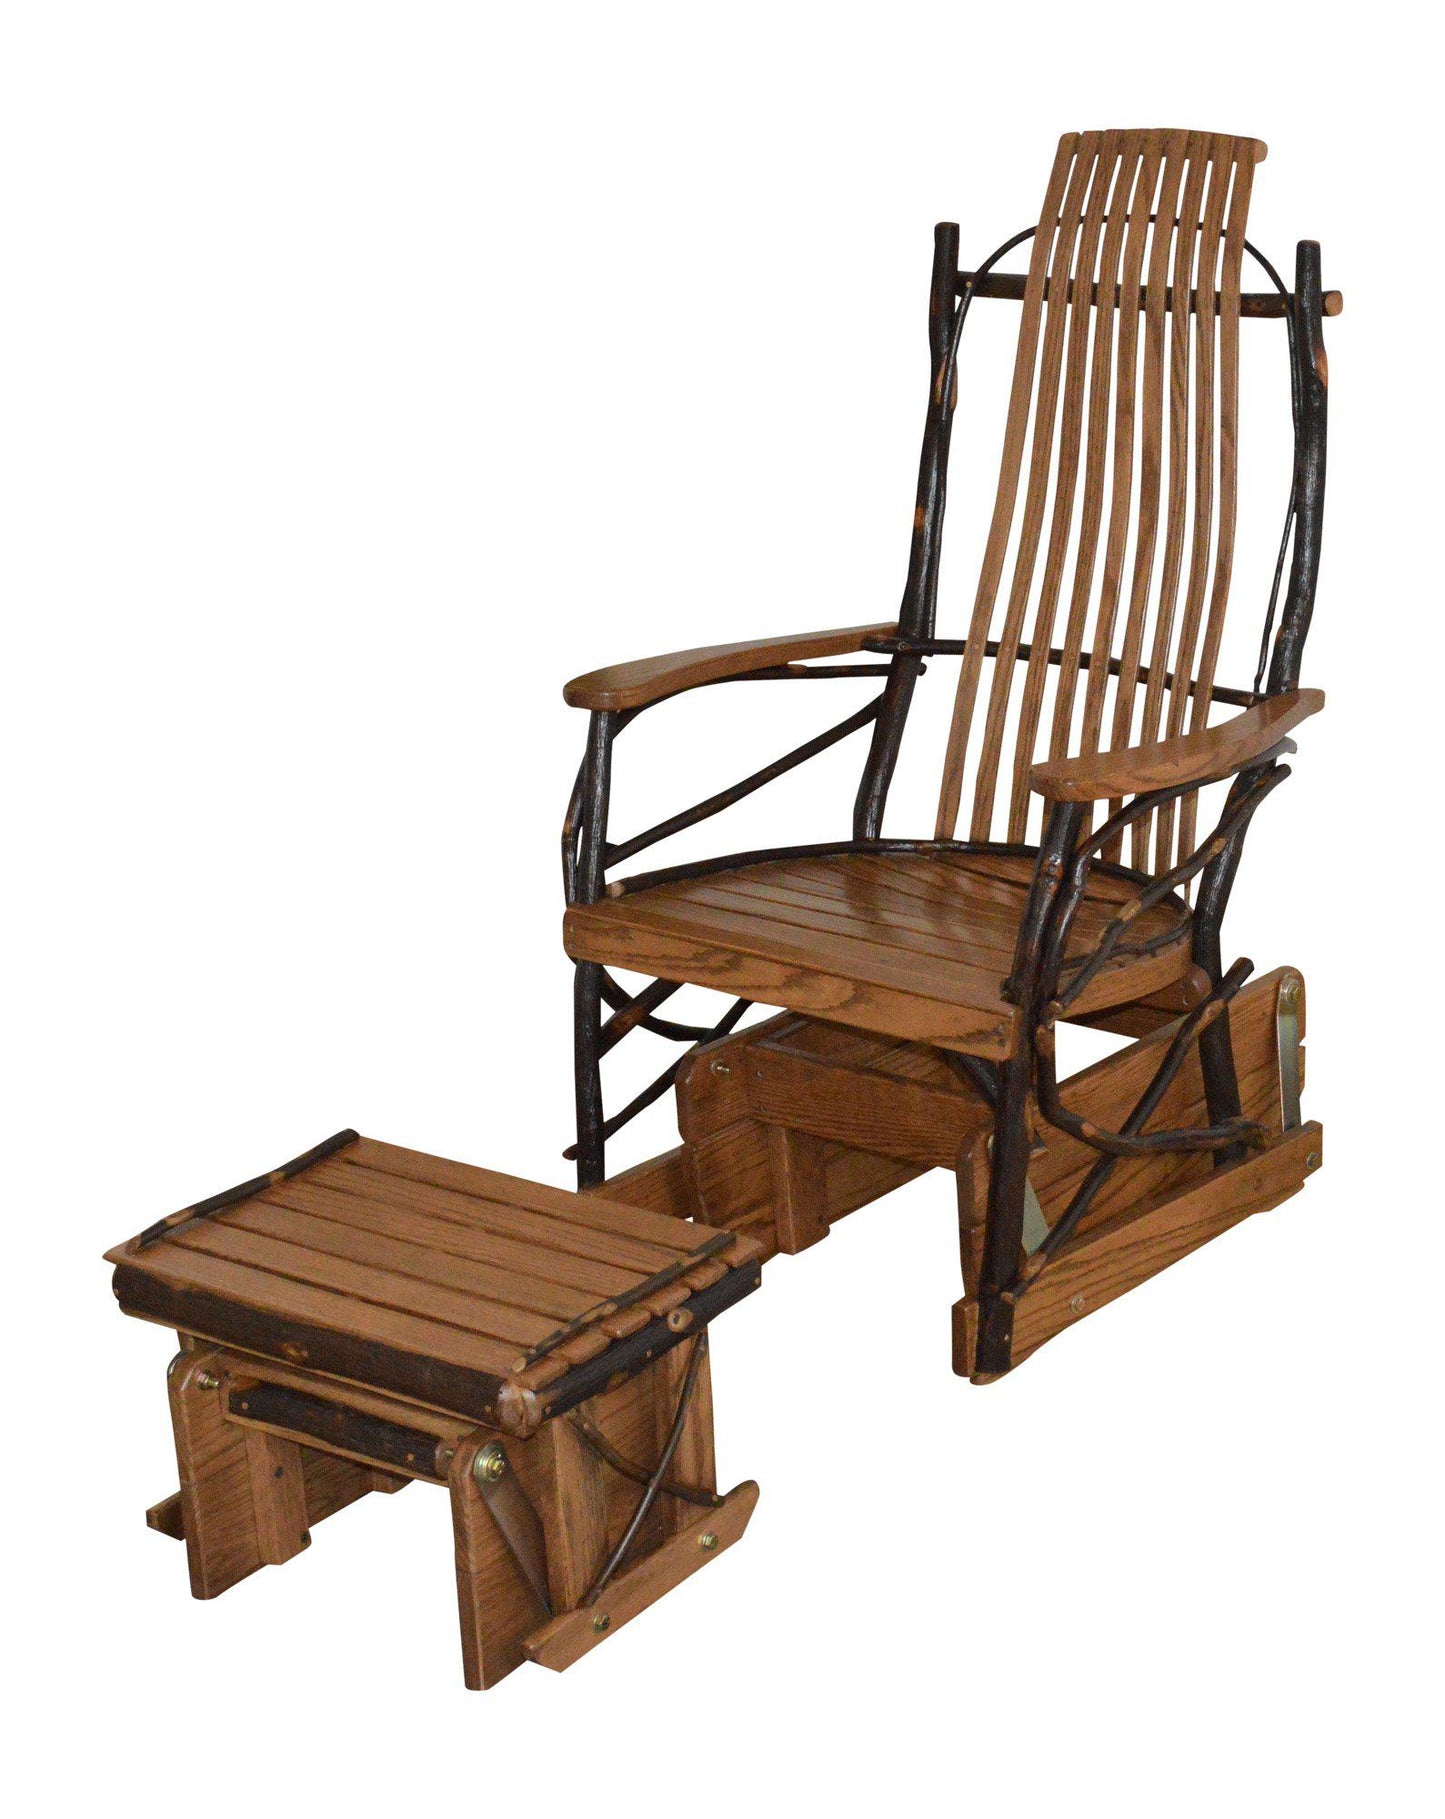 A&L Furniture Co. Amish Bentwood Hickory Glider Rocker with Gliding Ottoman Set - LEAD TIME TO SHIP 10 BUSINESS DAYS